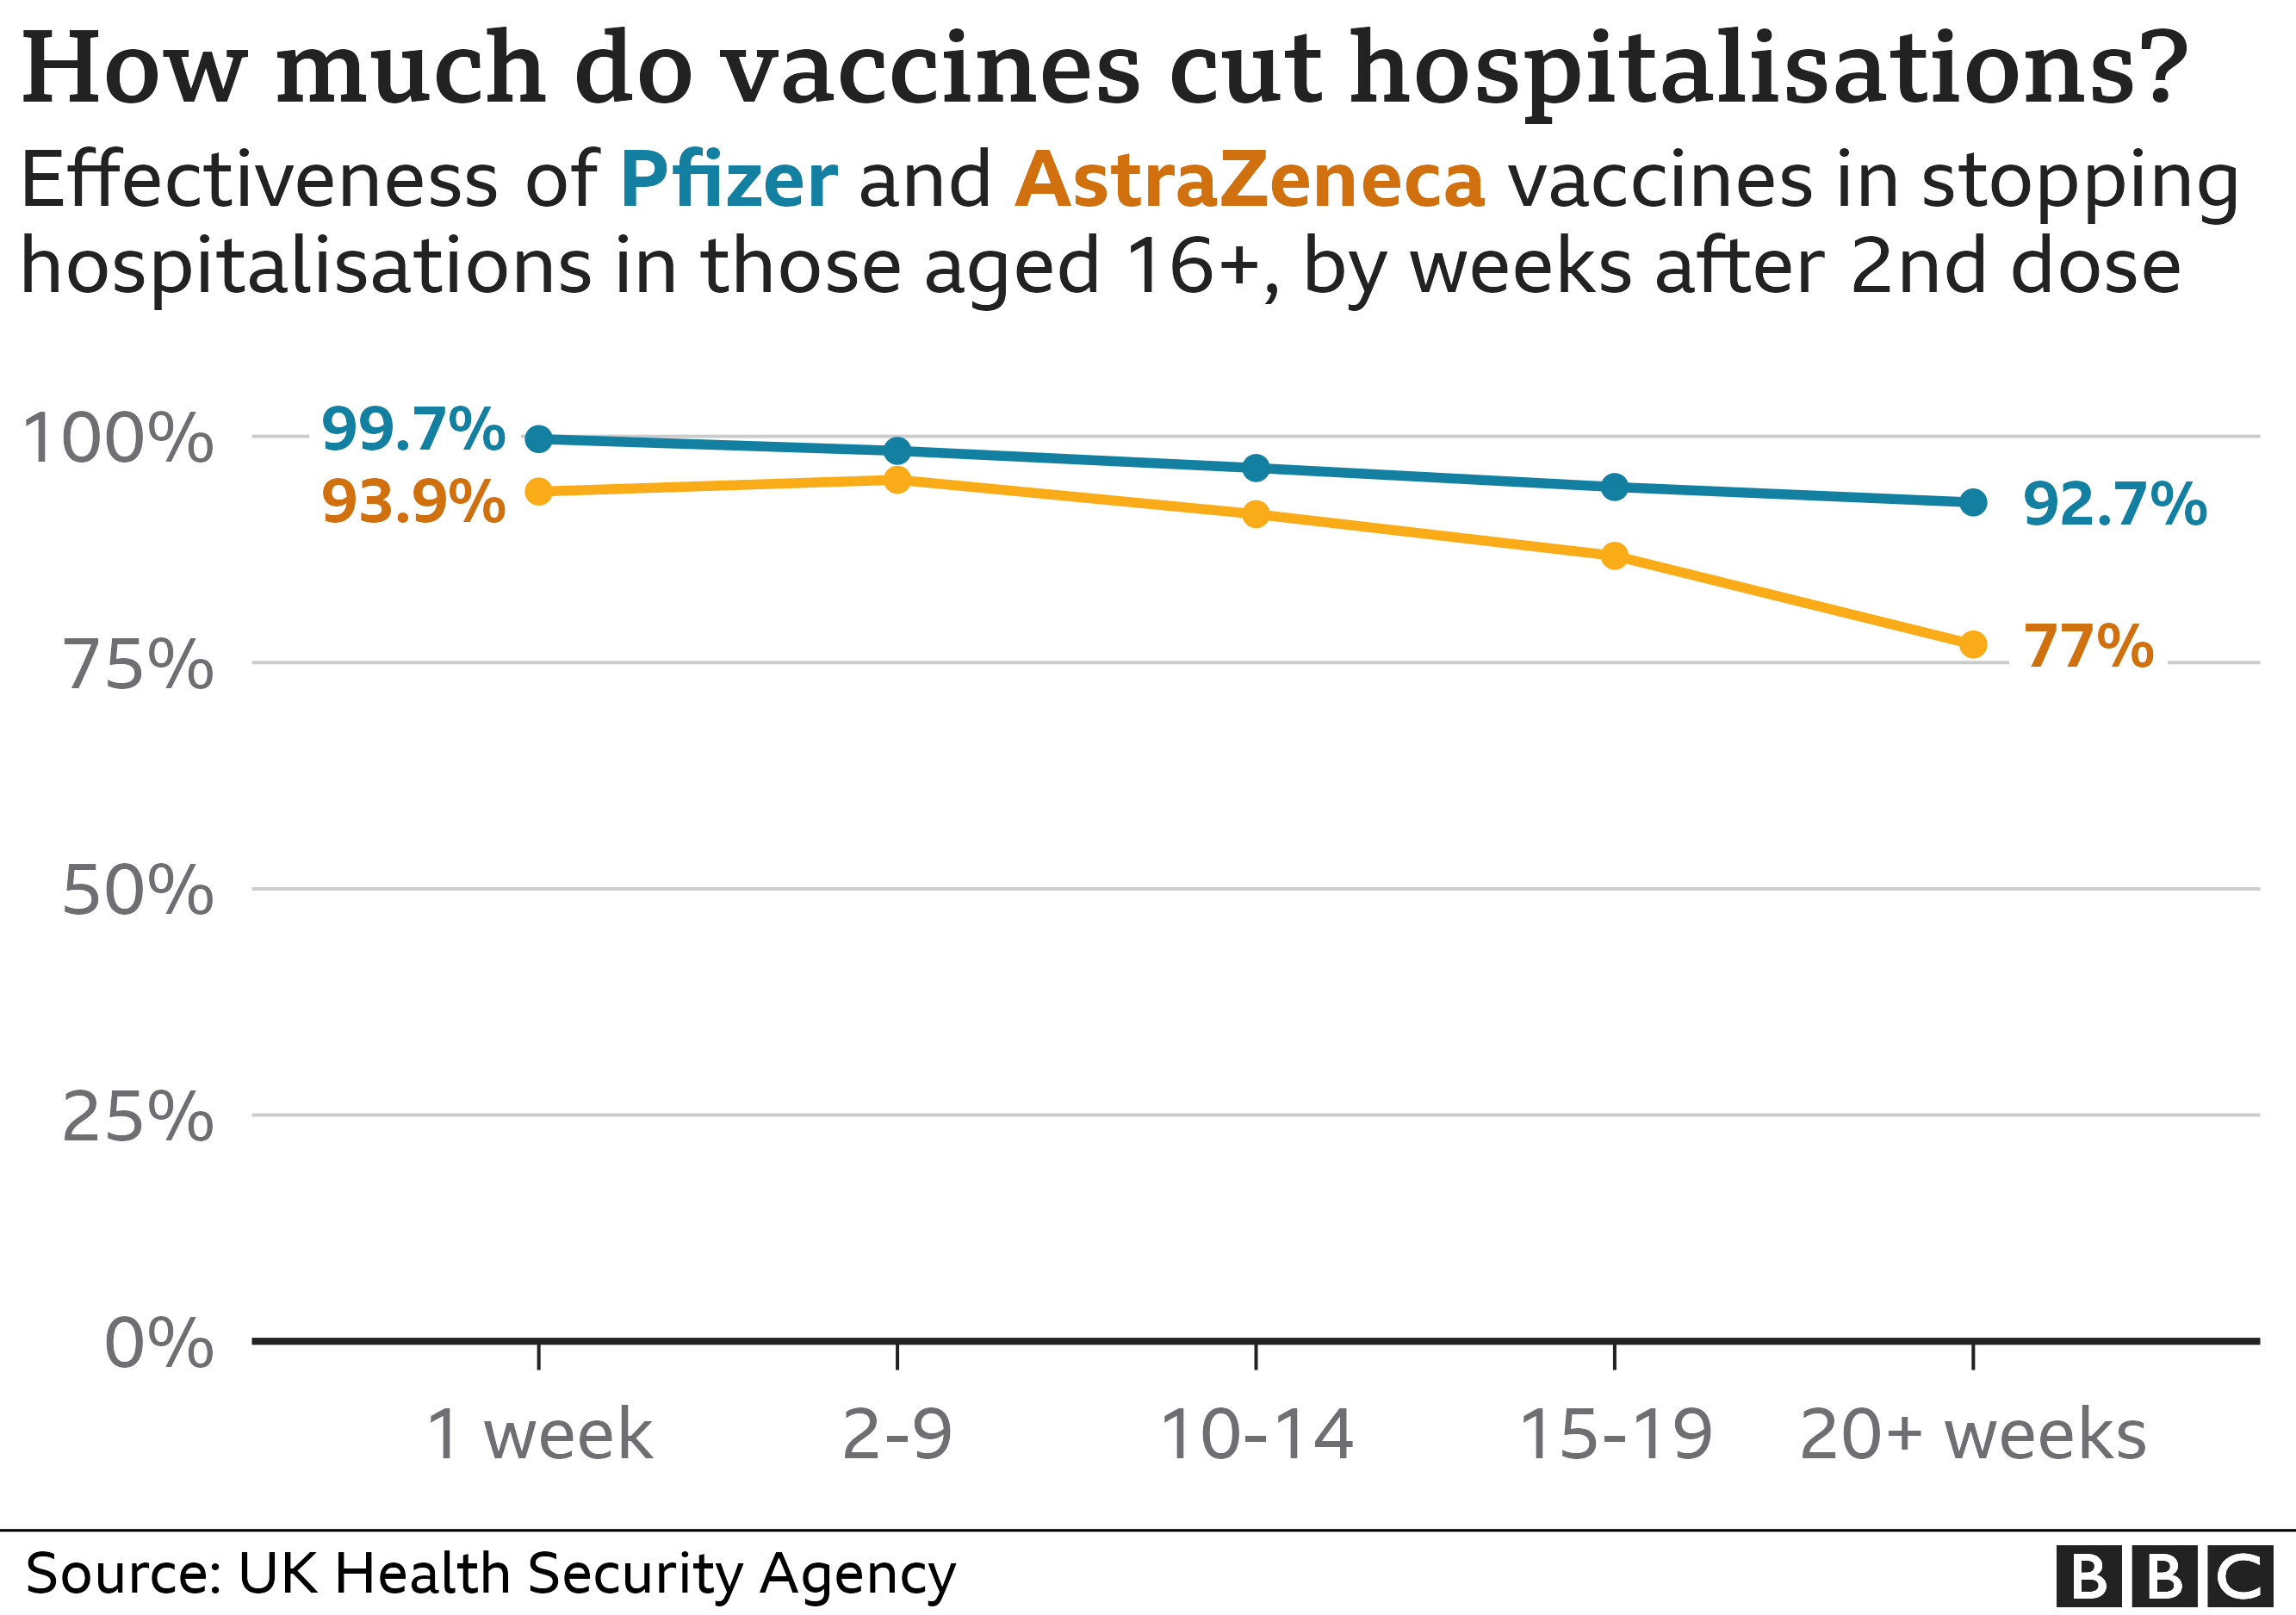 Graph: How much do vaccines cut hospitalisations? - showing effectiveness of Pfizer and AstraZeneca vaccines in stopping hospitalisations in those ages 16+, by weeks after 2nd dose